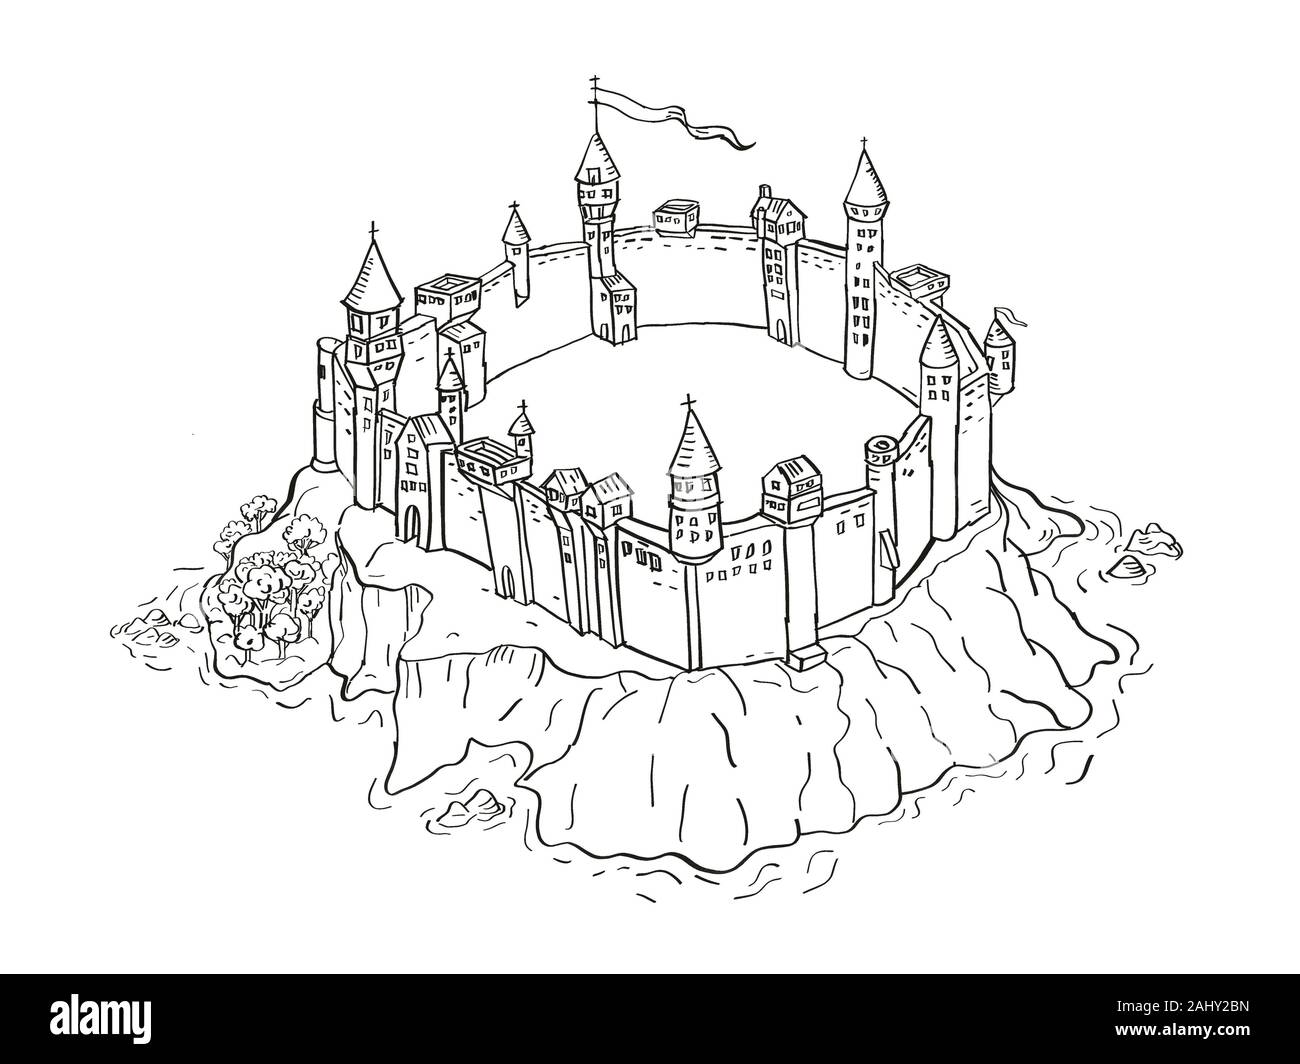 Retro cartoon style drawing of a vintage fantasy or treasure map showing a Castle or Fortress on an island on isolated white background done in black Stock Photo